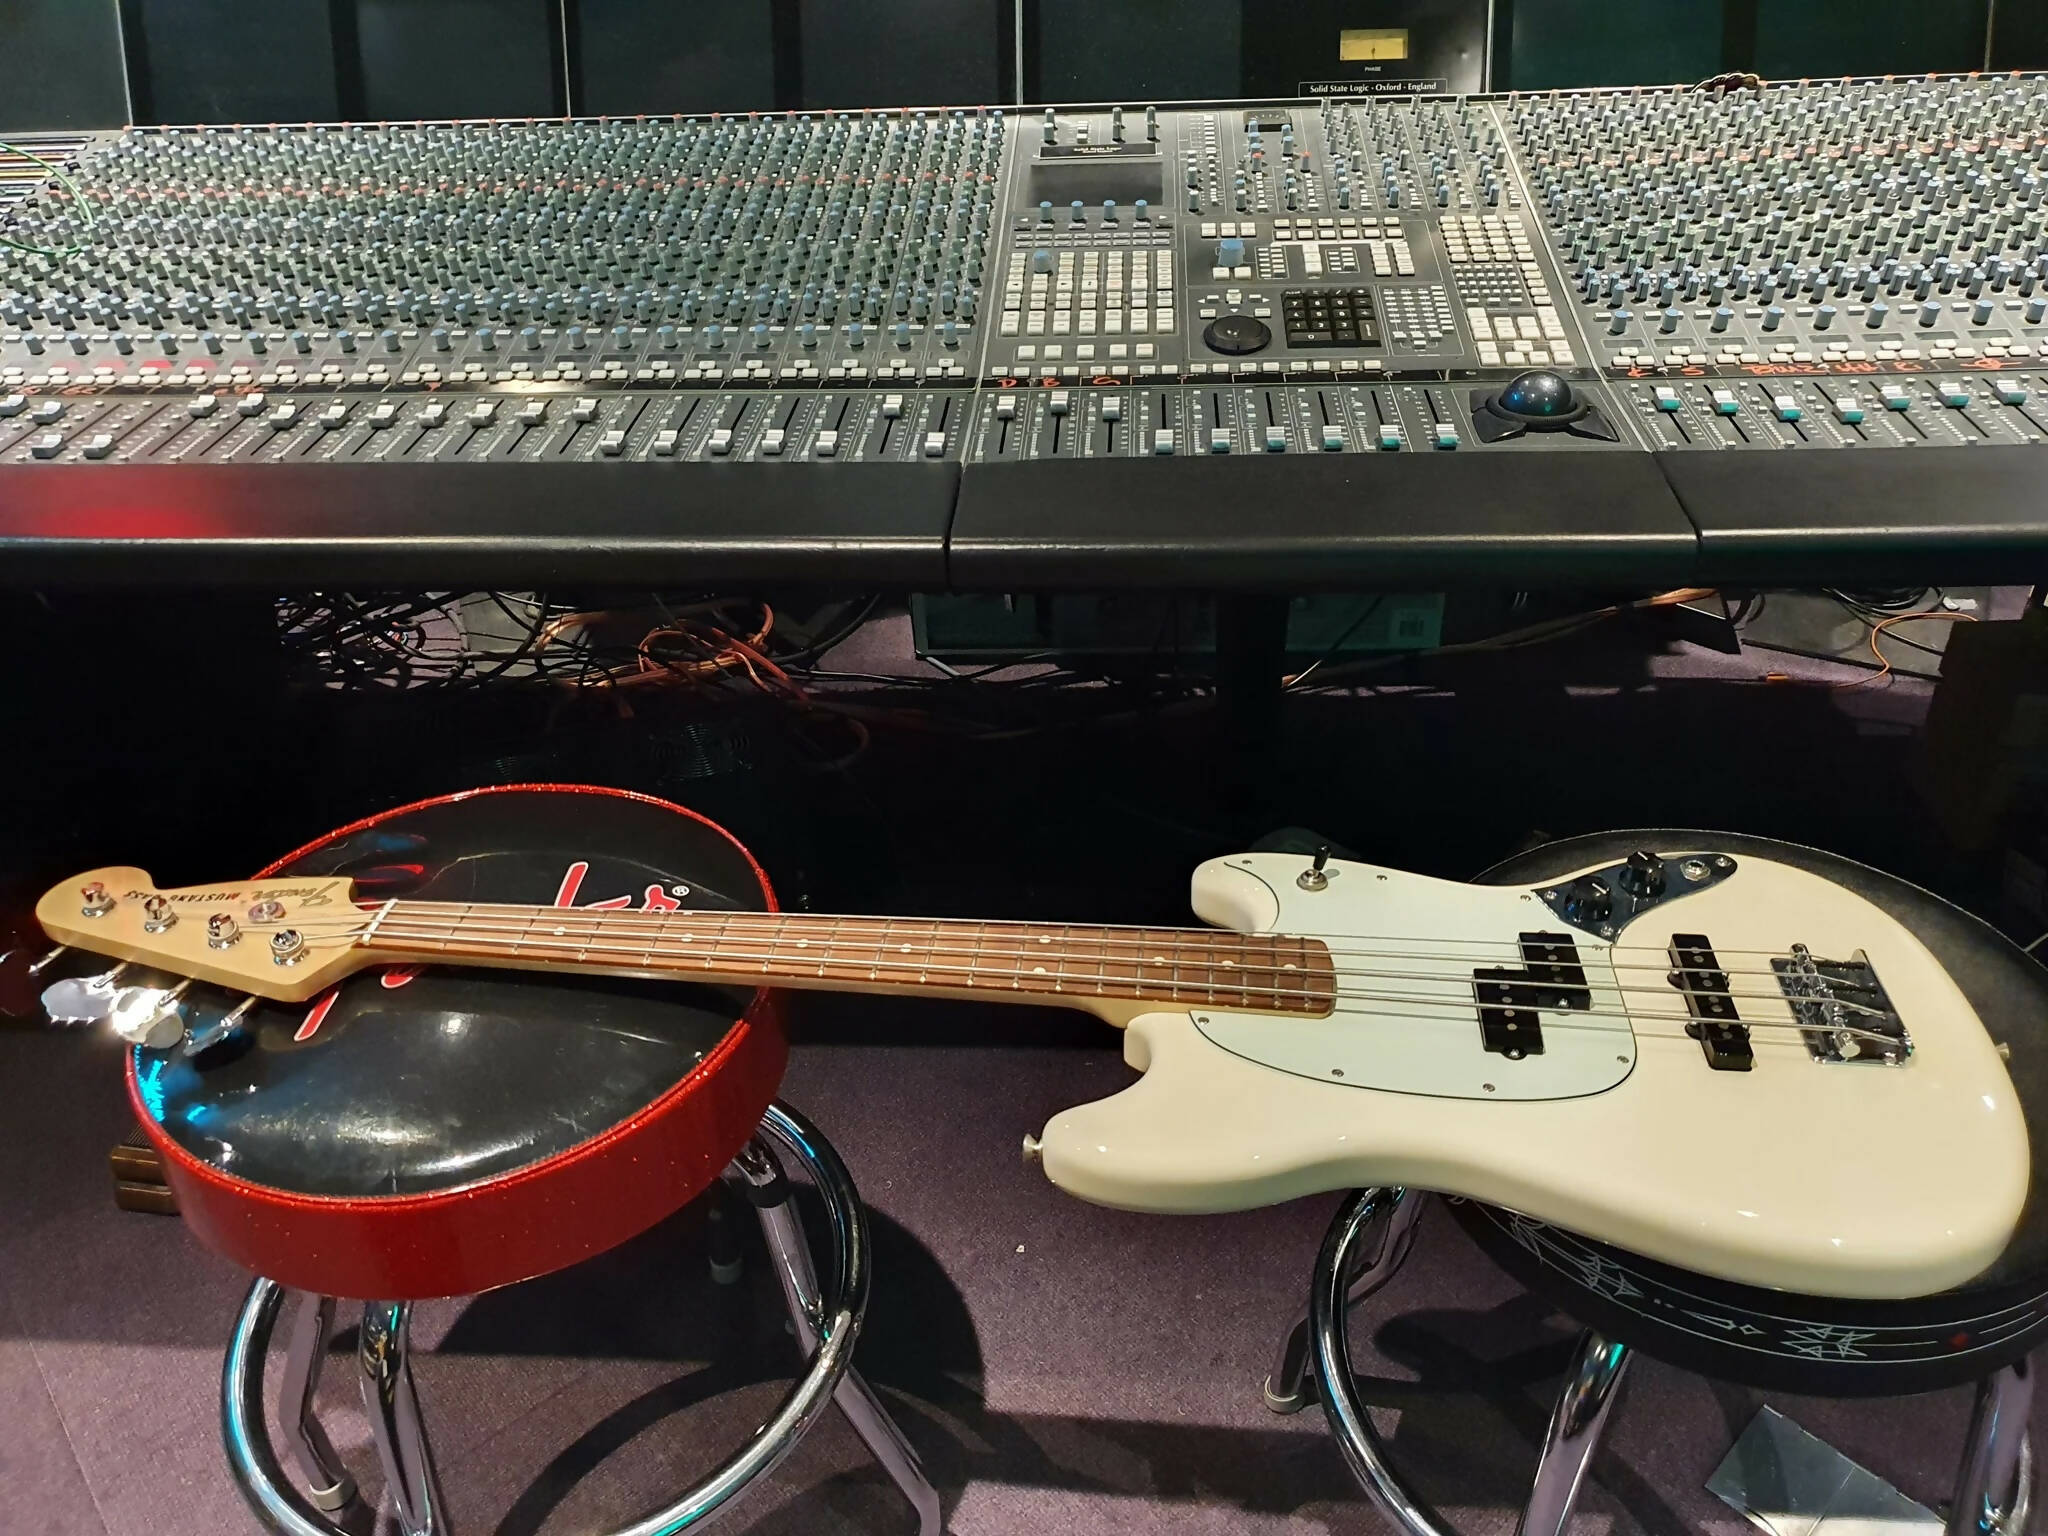 Fender Mustang Short Scale PJ Bass Artist Owned by The Darkness - Album Played!